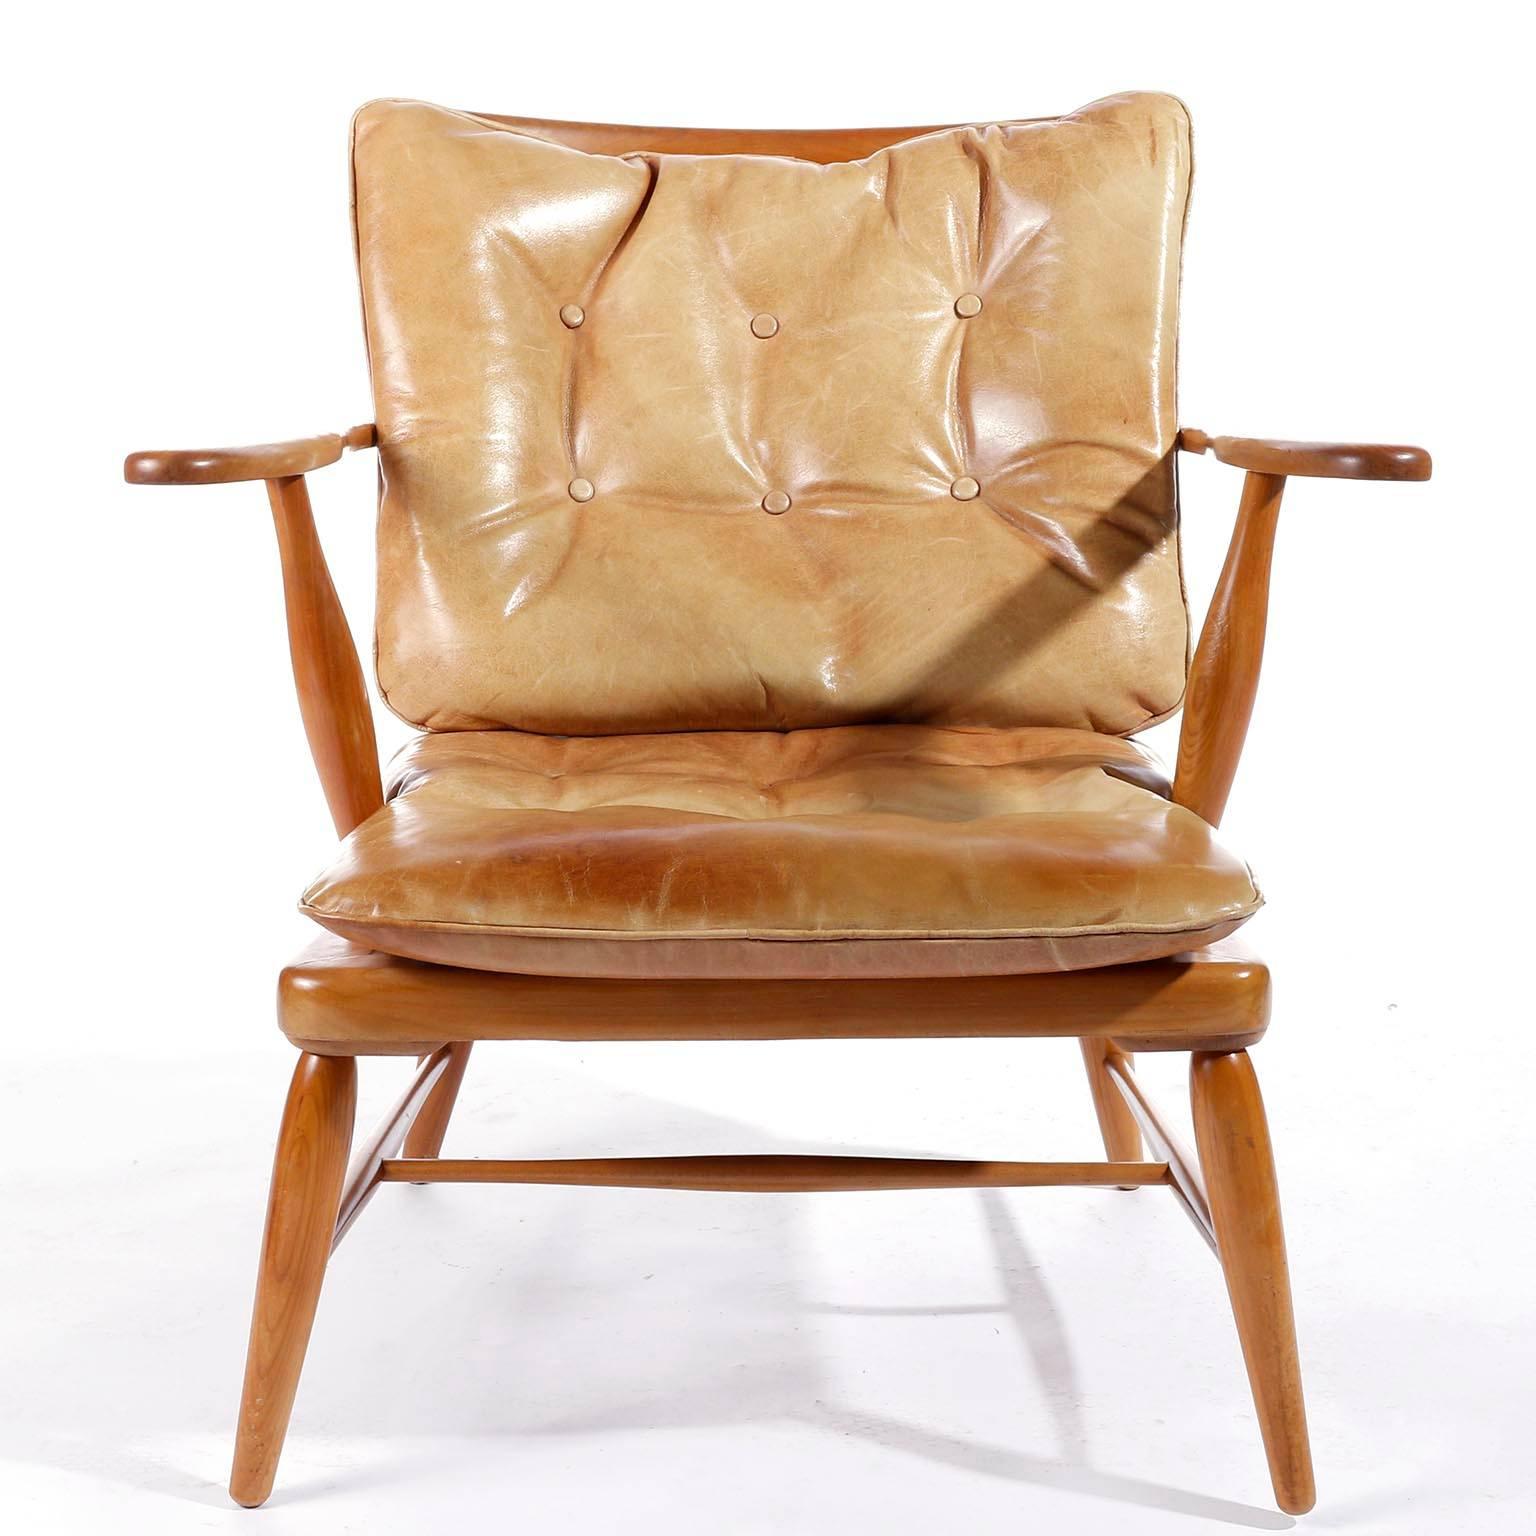 Austrian Mid-Century Modern, Arm Chair in Wood and Patinated Cognac Leather, 1950 For Sale